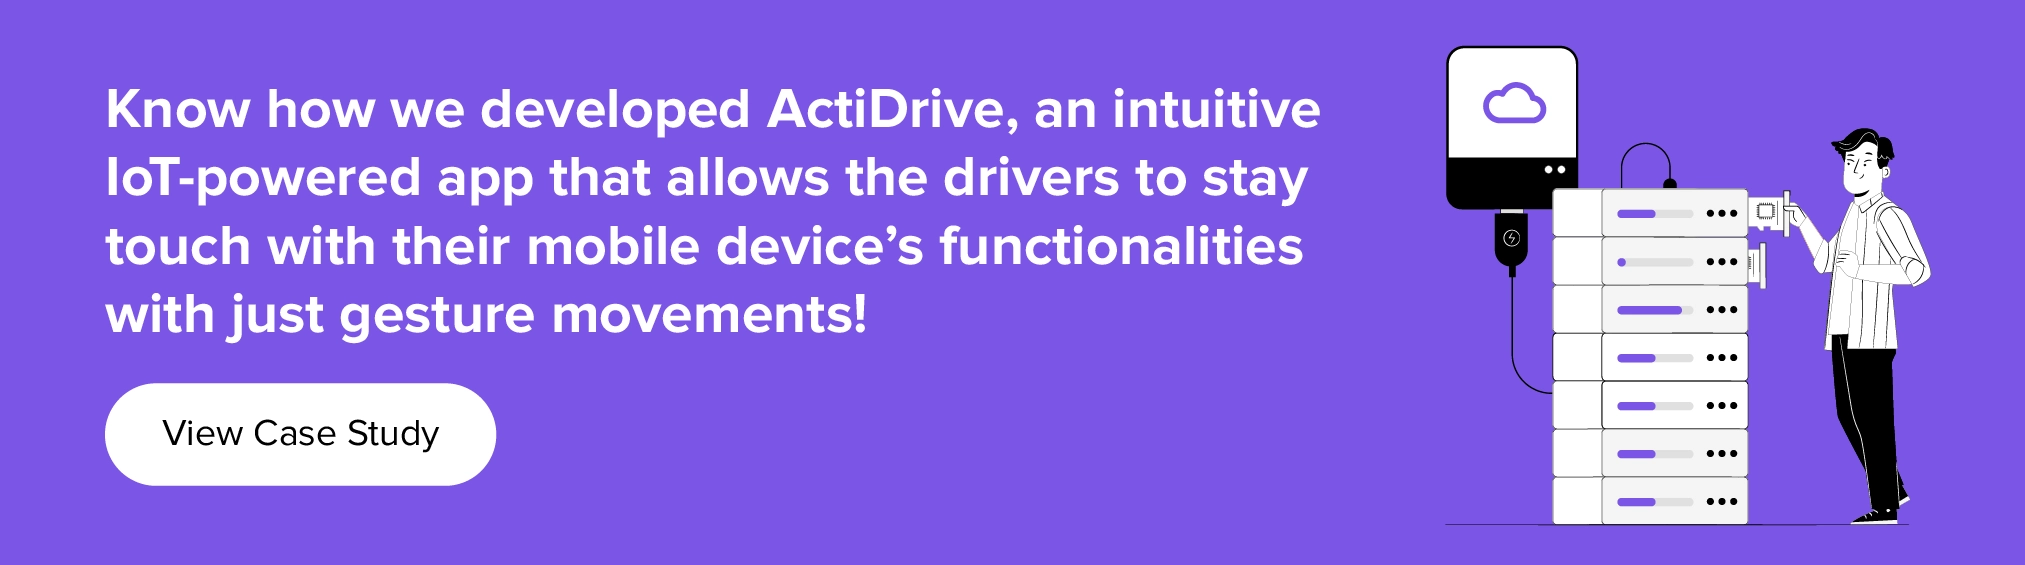 how we developed a gesture recognition app called ActiDrive